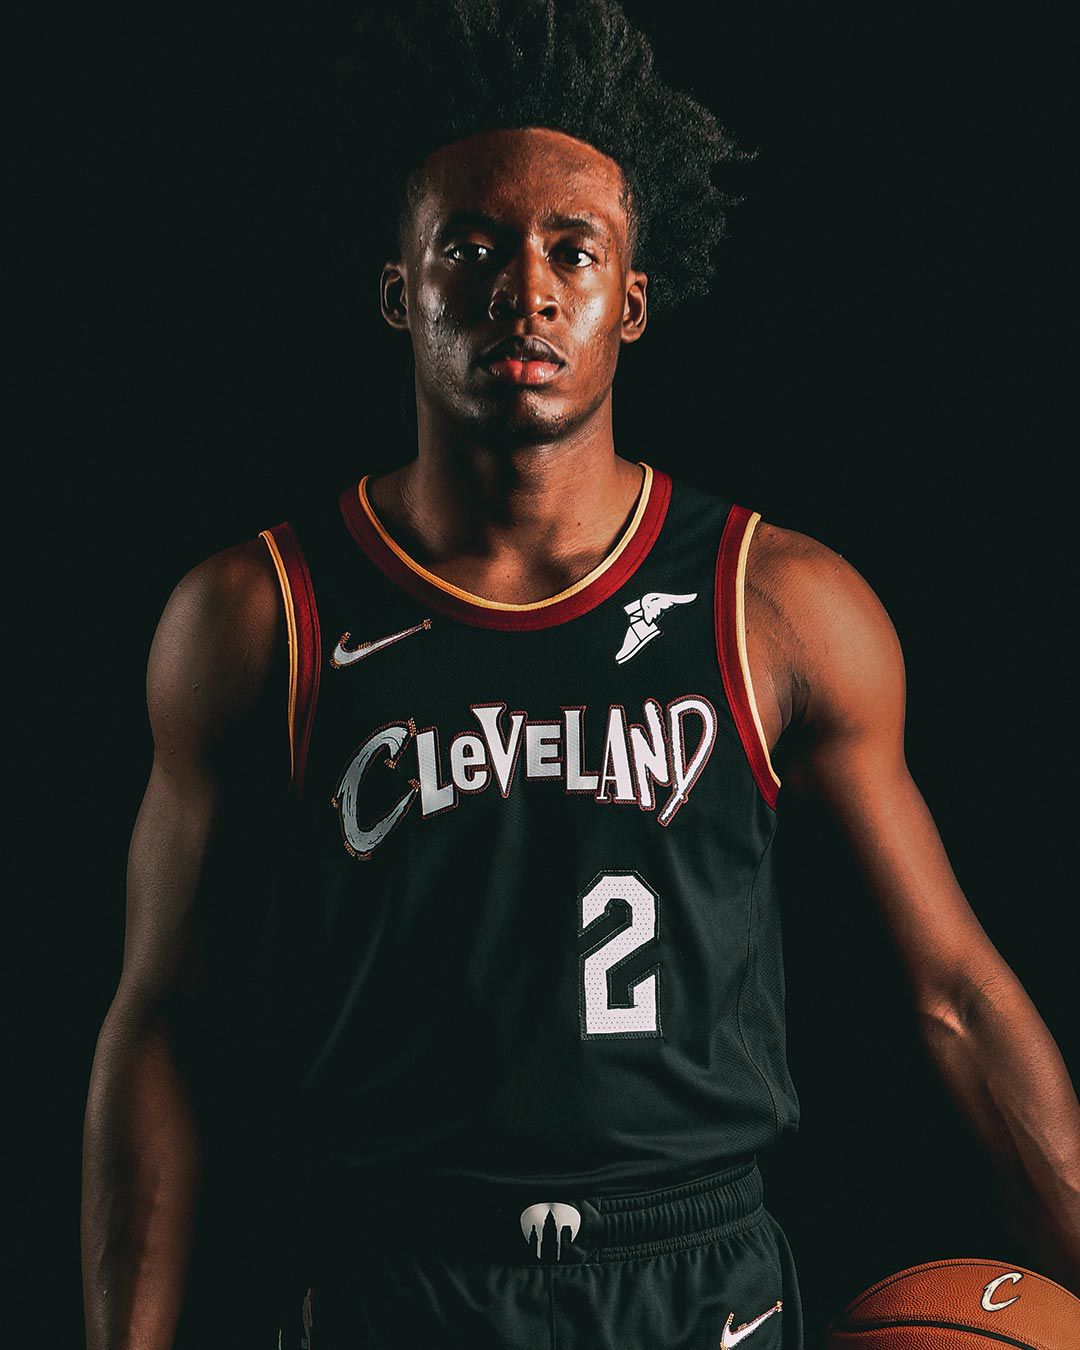 Cavaliers celebrate rock 'n' roll with City Edition uniform